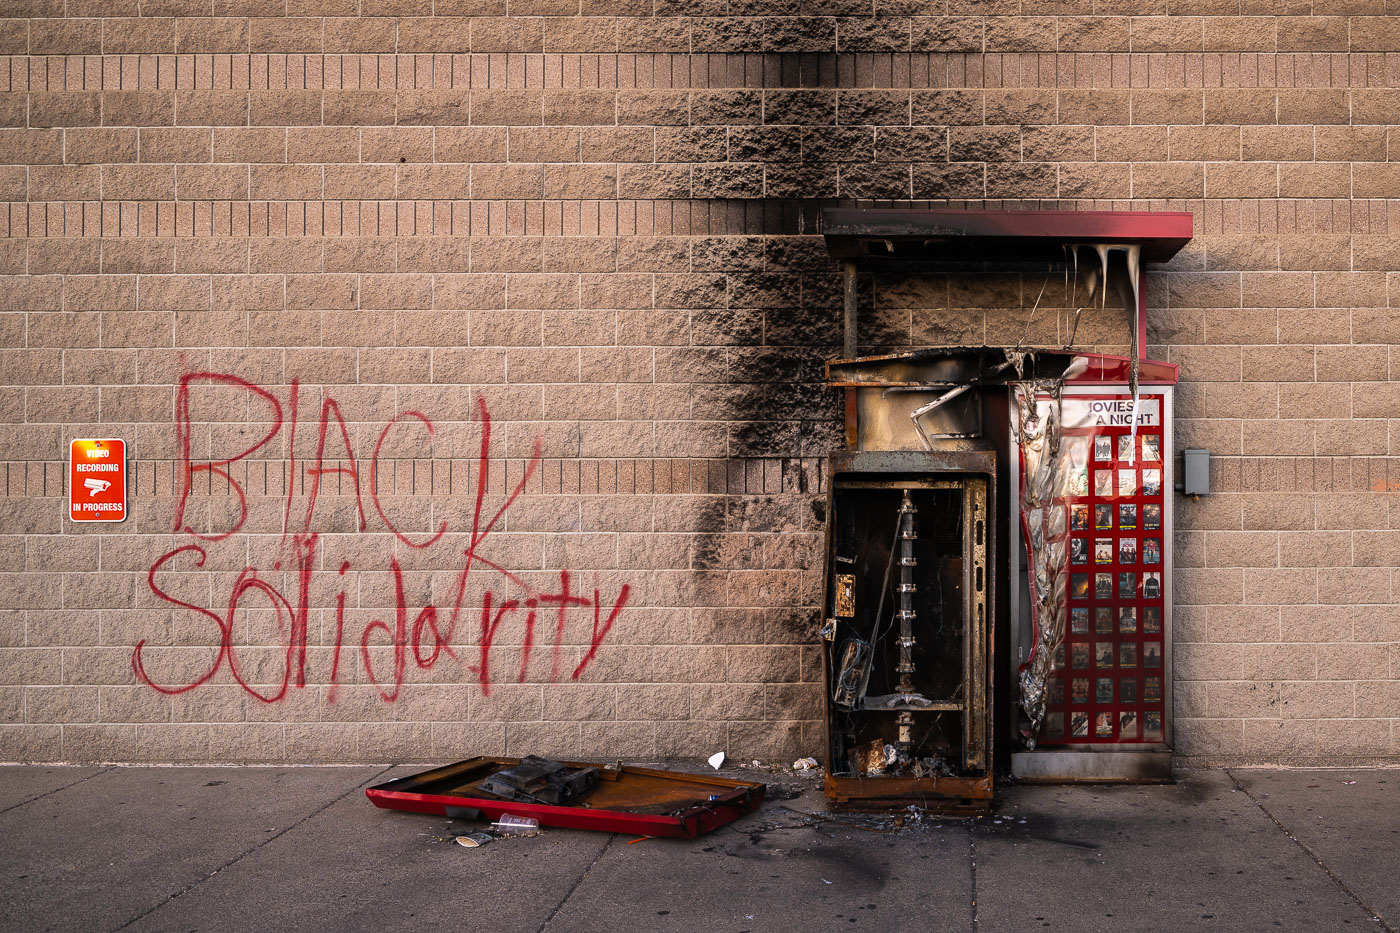 Black Solidarity and a burned Red Box kiosk.